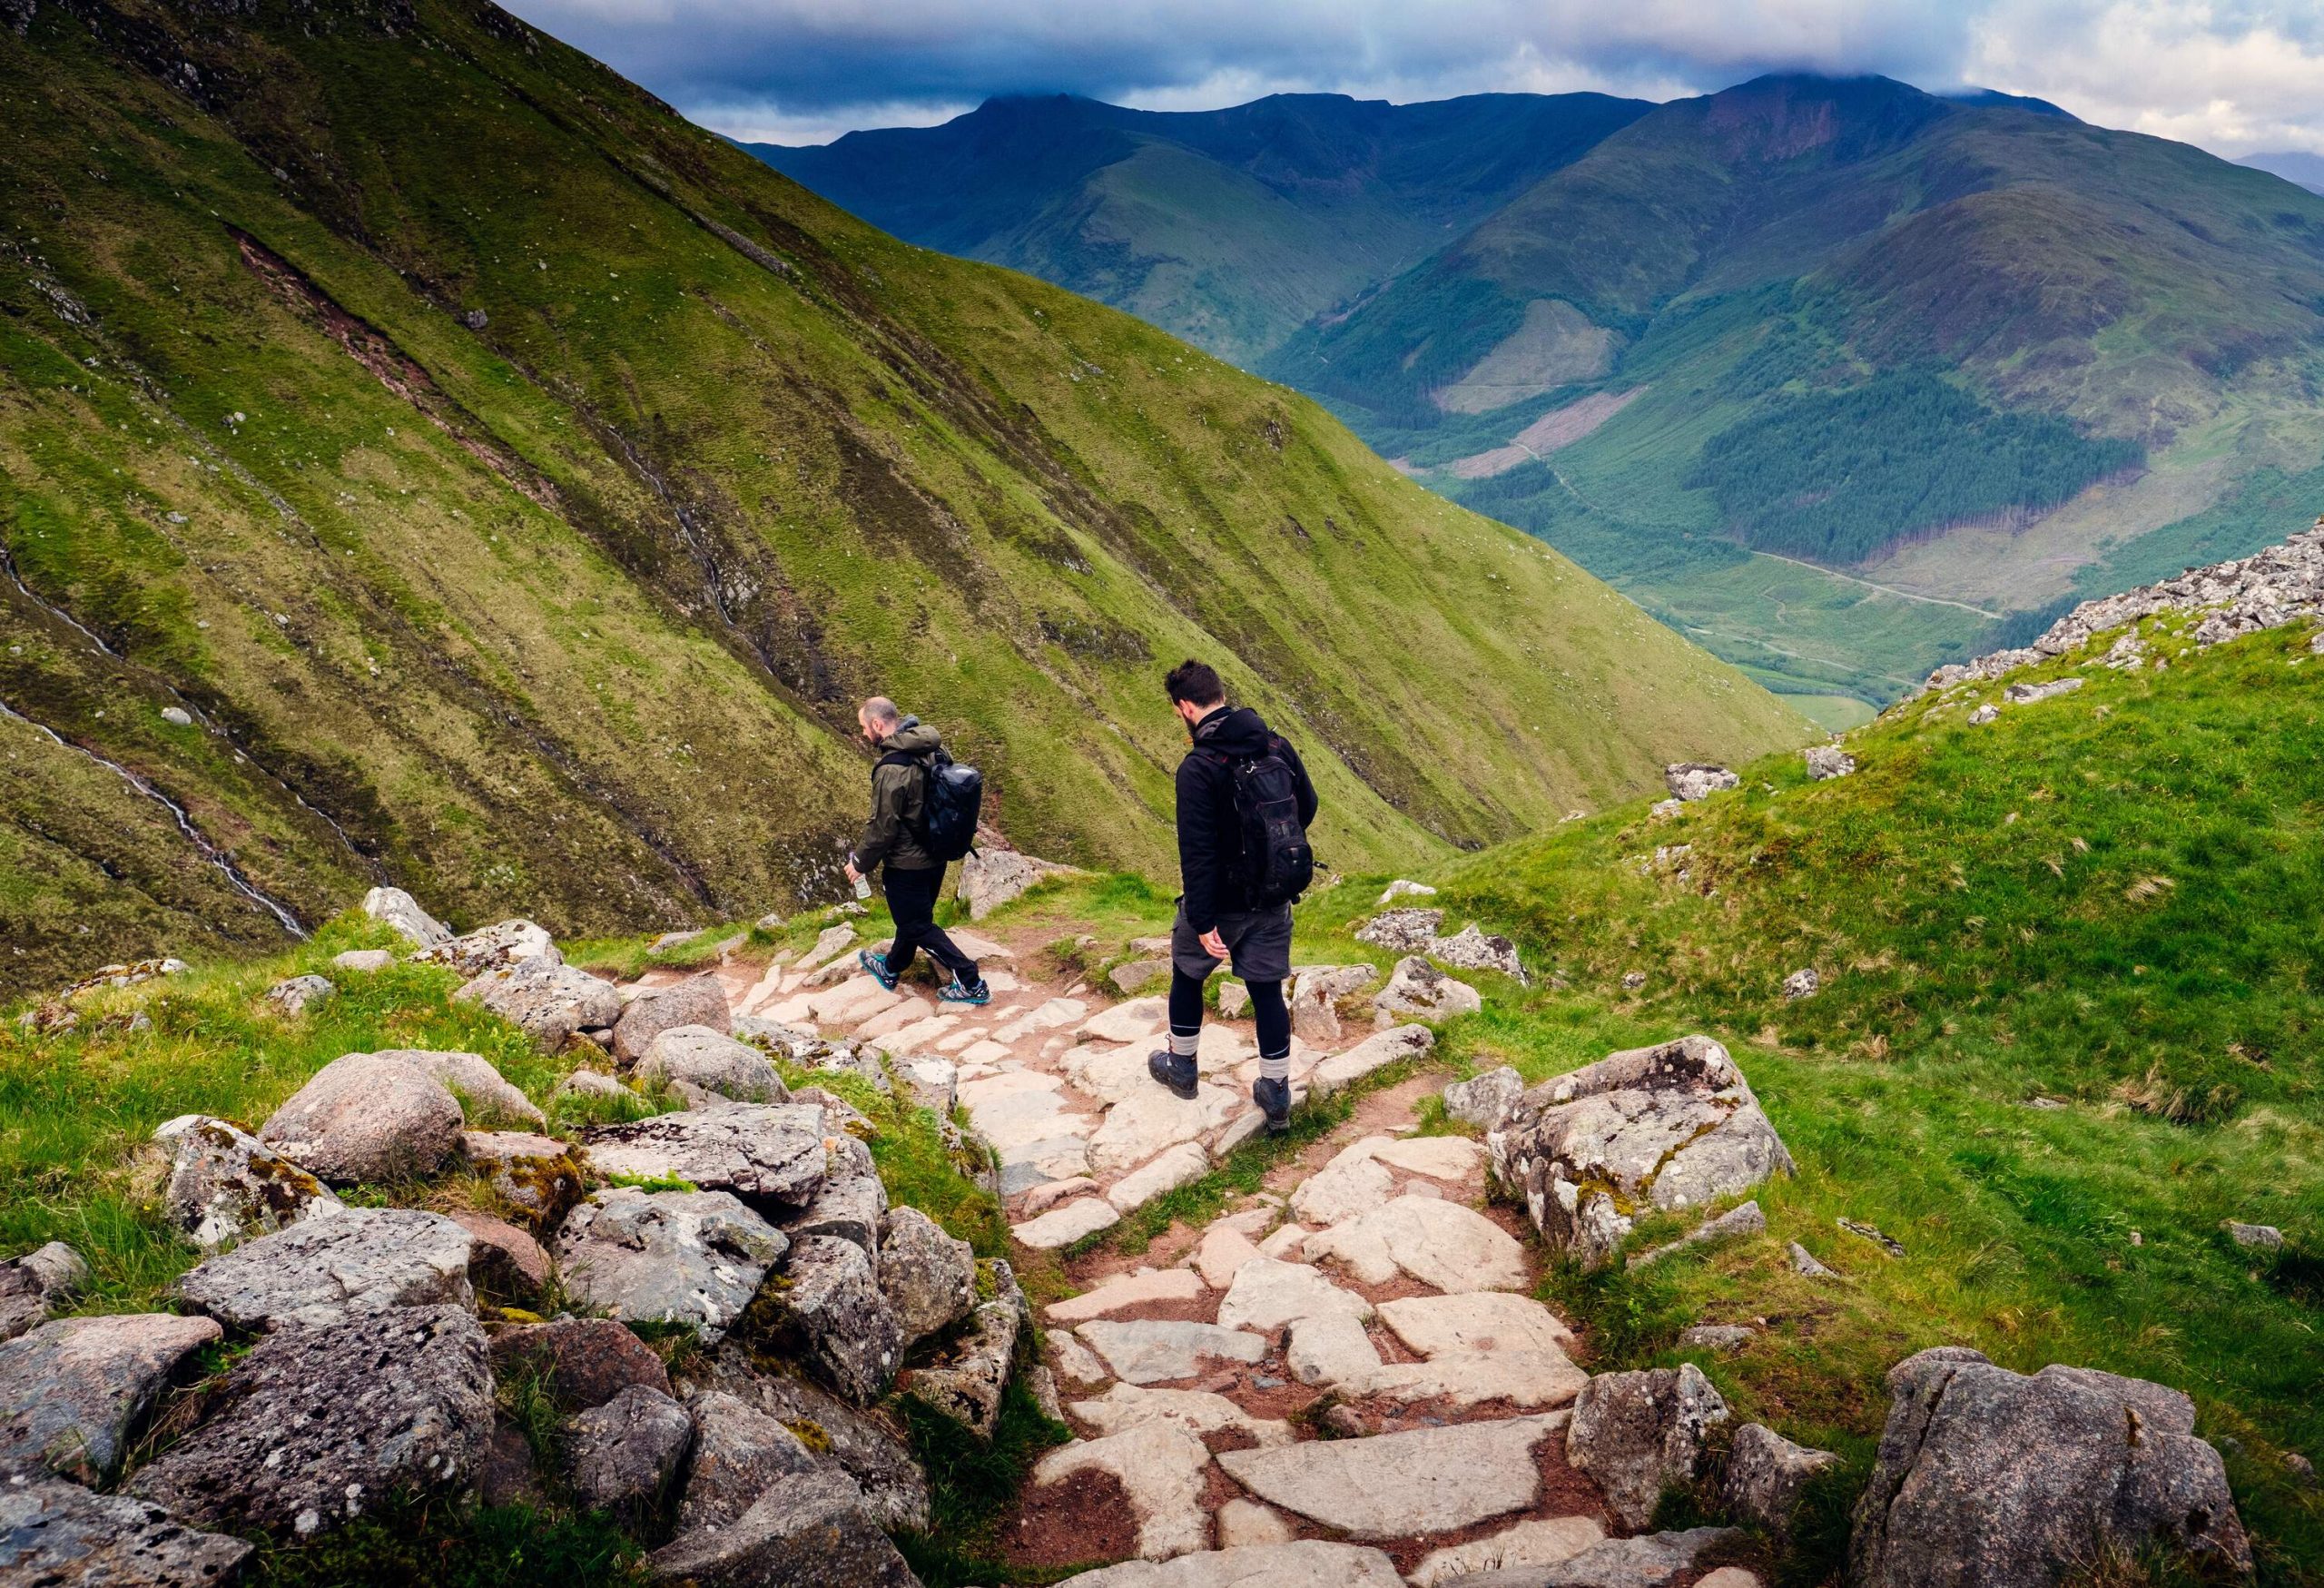 Two male hikers embark on an adventurous journey, descending a rugged stone path on the slope of a lush mountain.